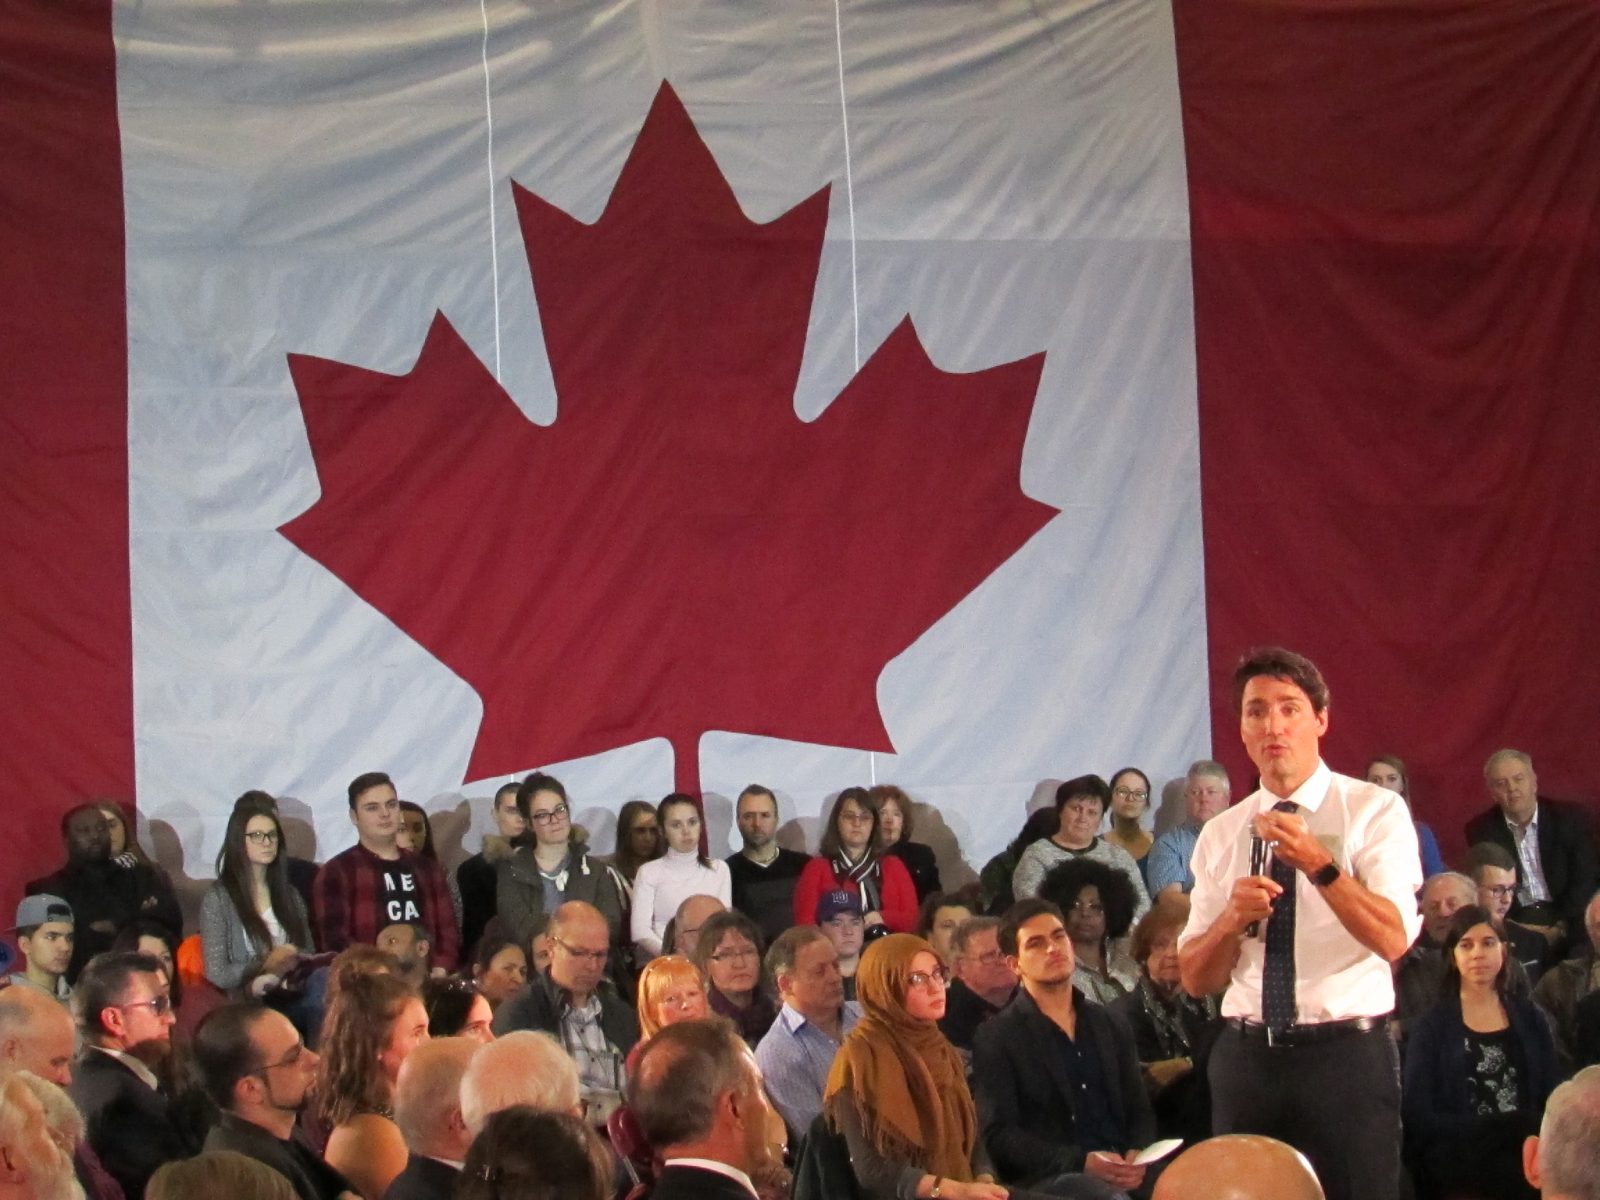 Trudeau’s visit to the Sherbrooke Armoury has English community up in arms